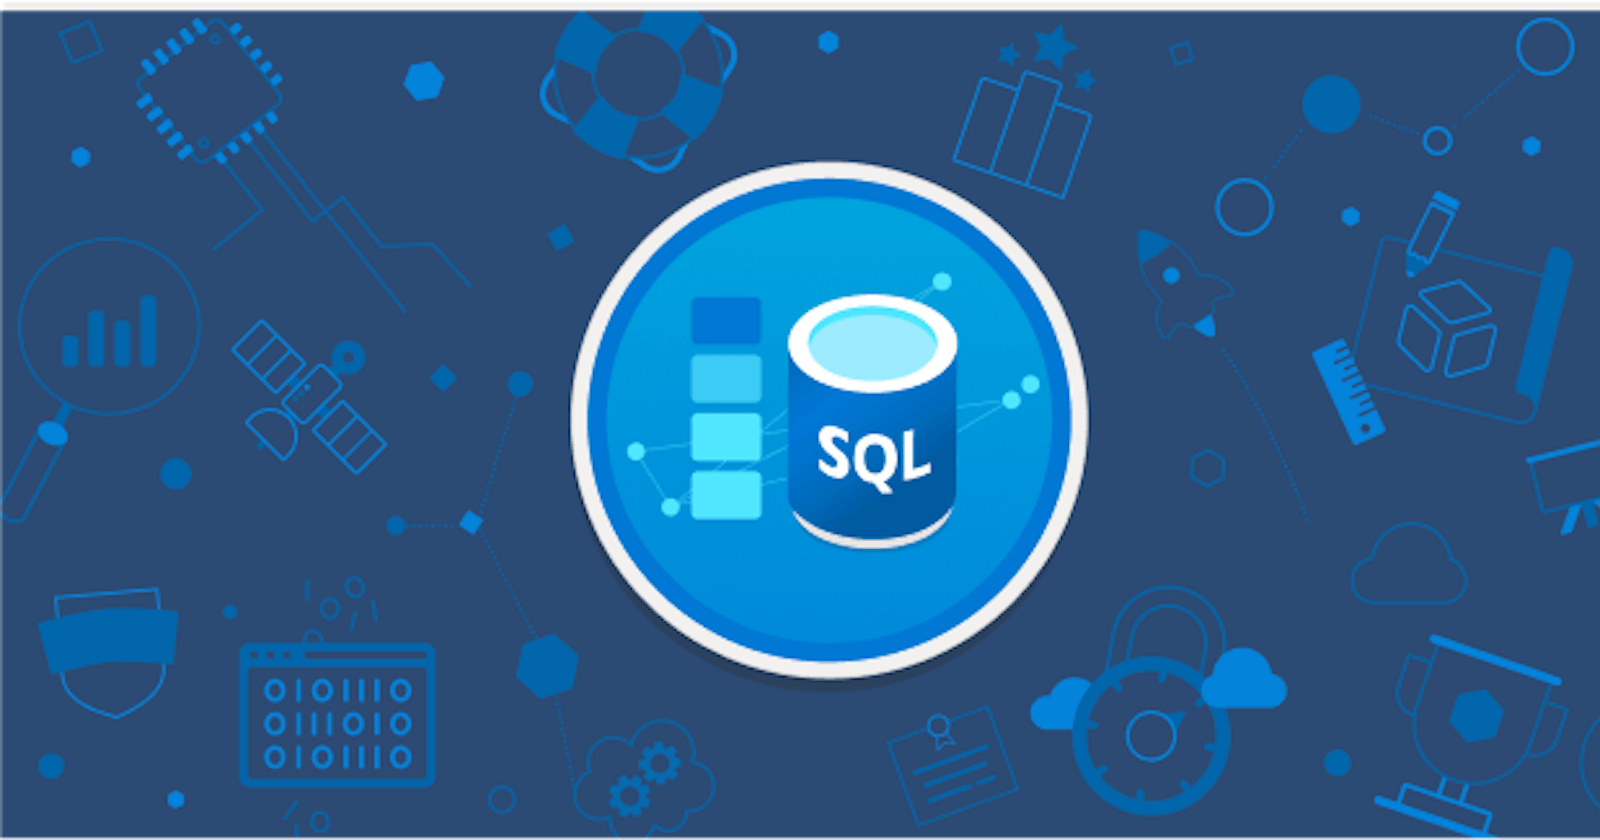 How to Configure Azure SQL Backup Retention and Restore a Database (Point in Time)